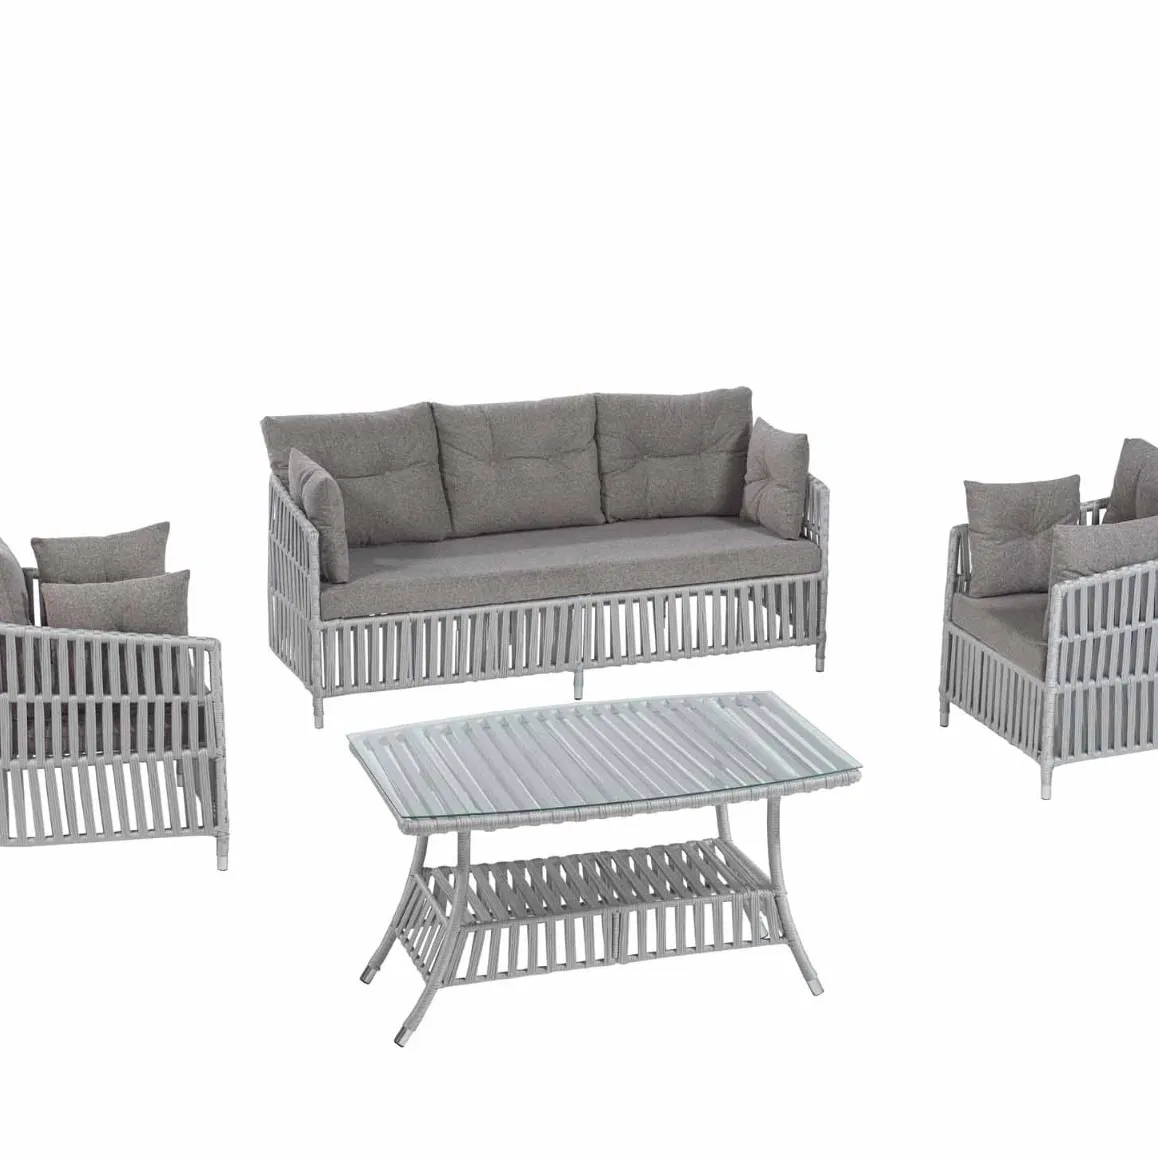 Hot sale! Wholesale Wicker Furniture with Drawar Made inTurkey Rattan set Modern Outdoor Style in different colours